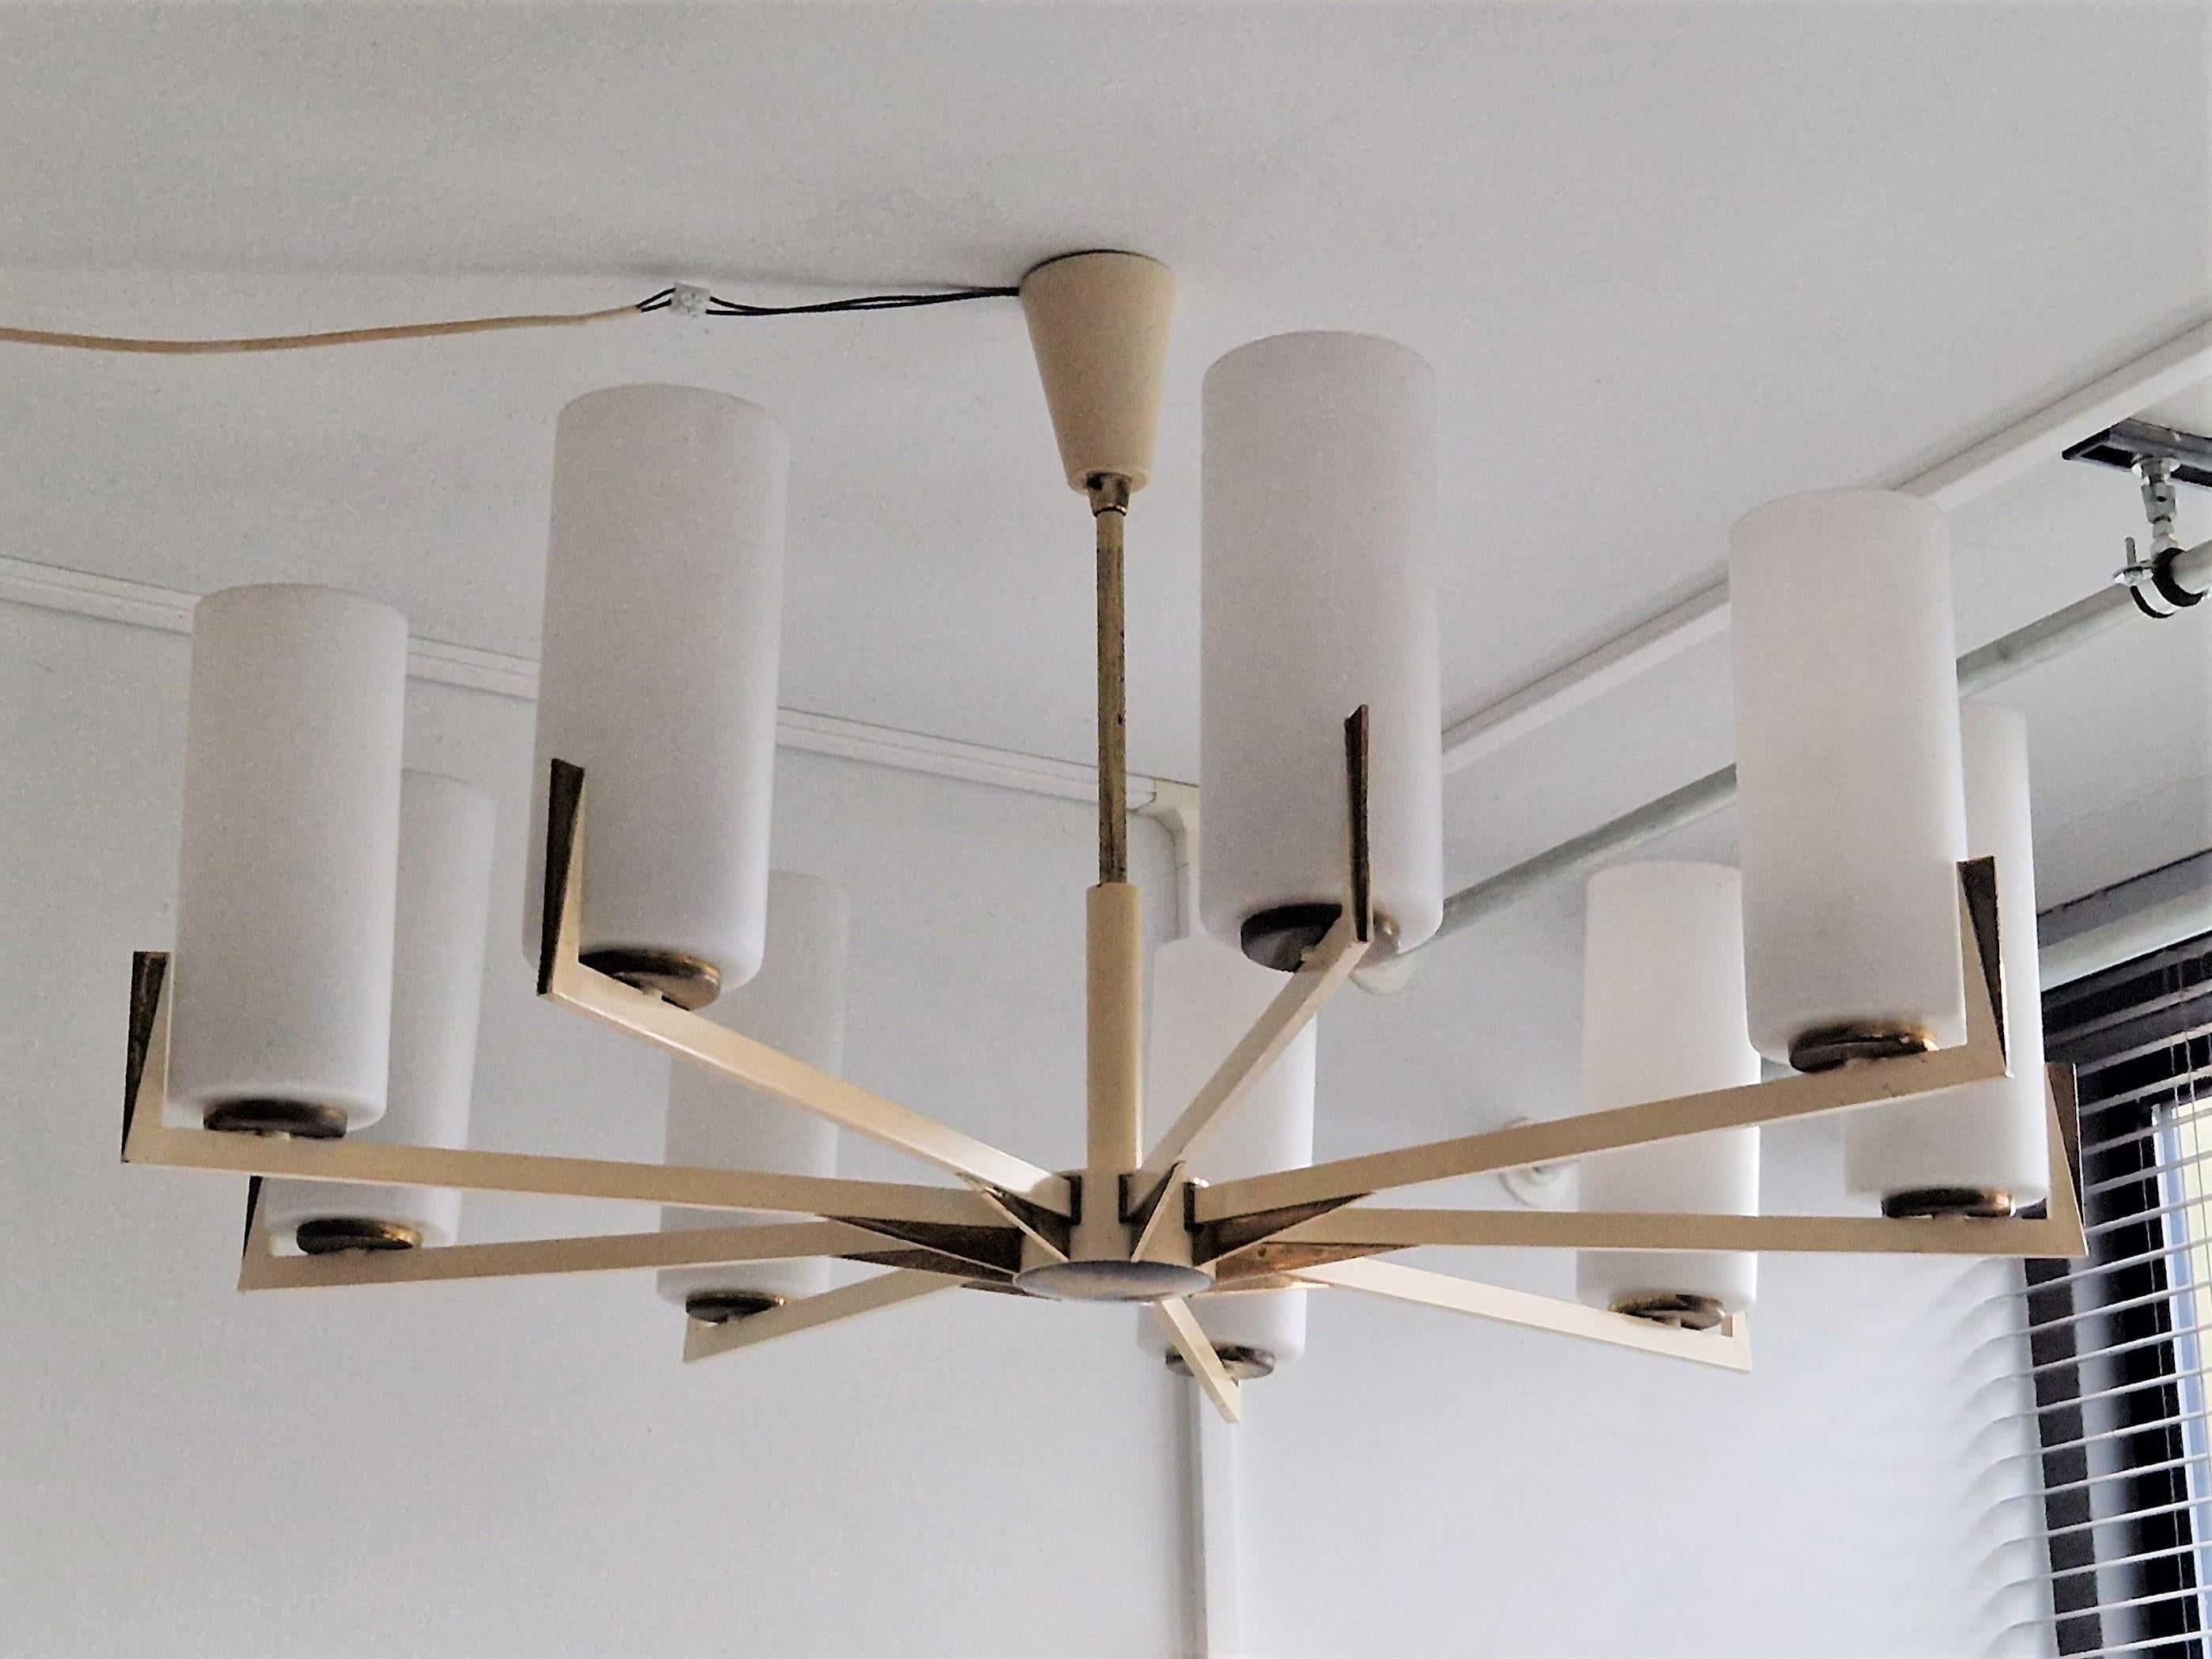 This is a very impressive chandelier with brass and cream white lacquered arms holding 9 opaline glass tubes that gives a beautiful diffused illumination. It is very likely a German design, made in the 1950's. A very modern and timeless design of